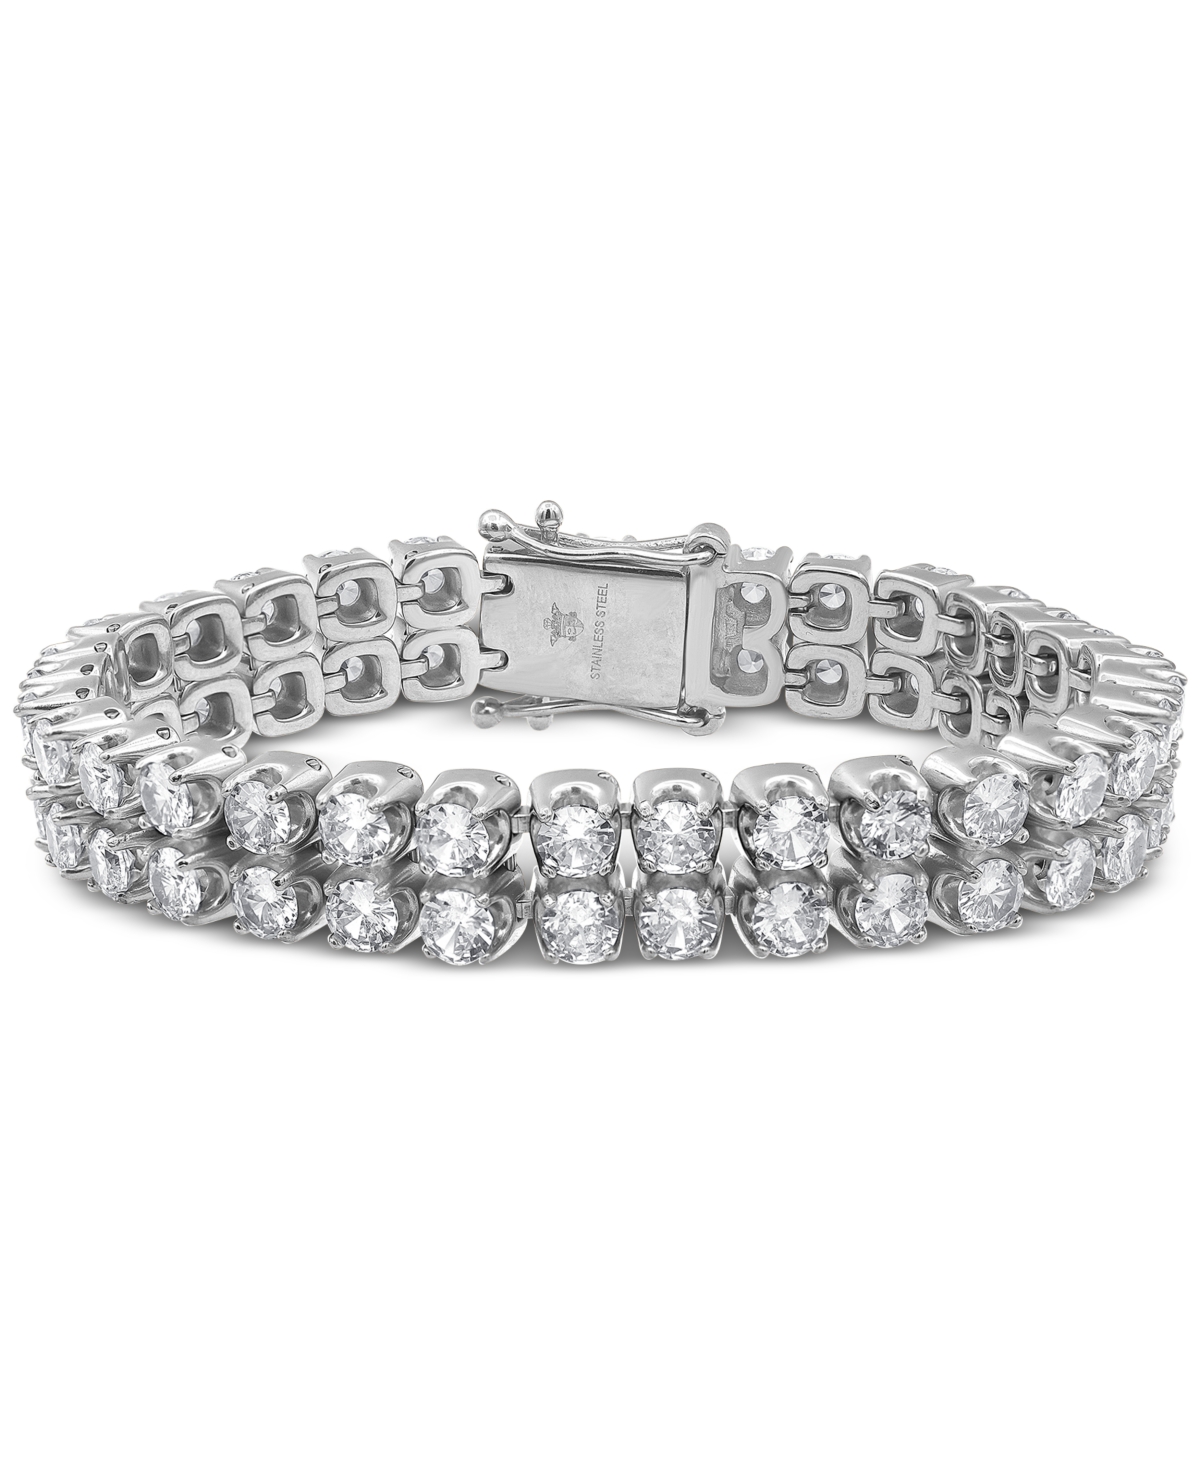 Men's Cubic Zirconia Double Row Tennis Bracelet in Black Ion-Plated Stainless Steel - Gold-Tone